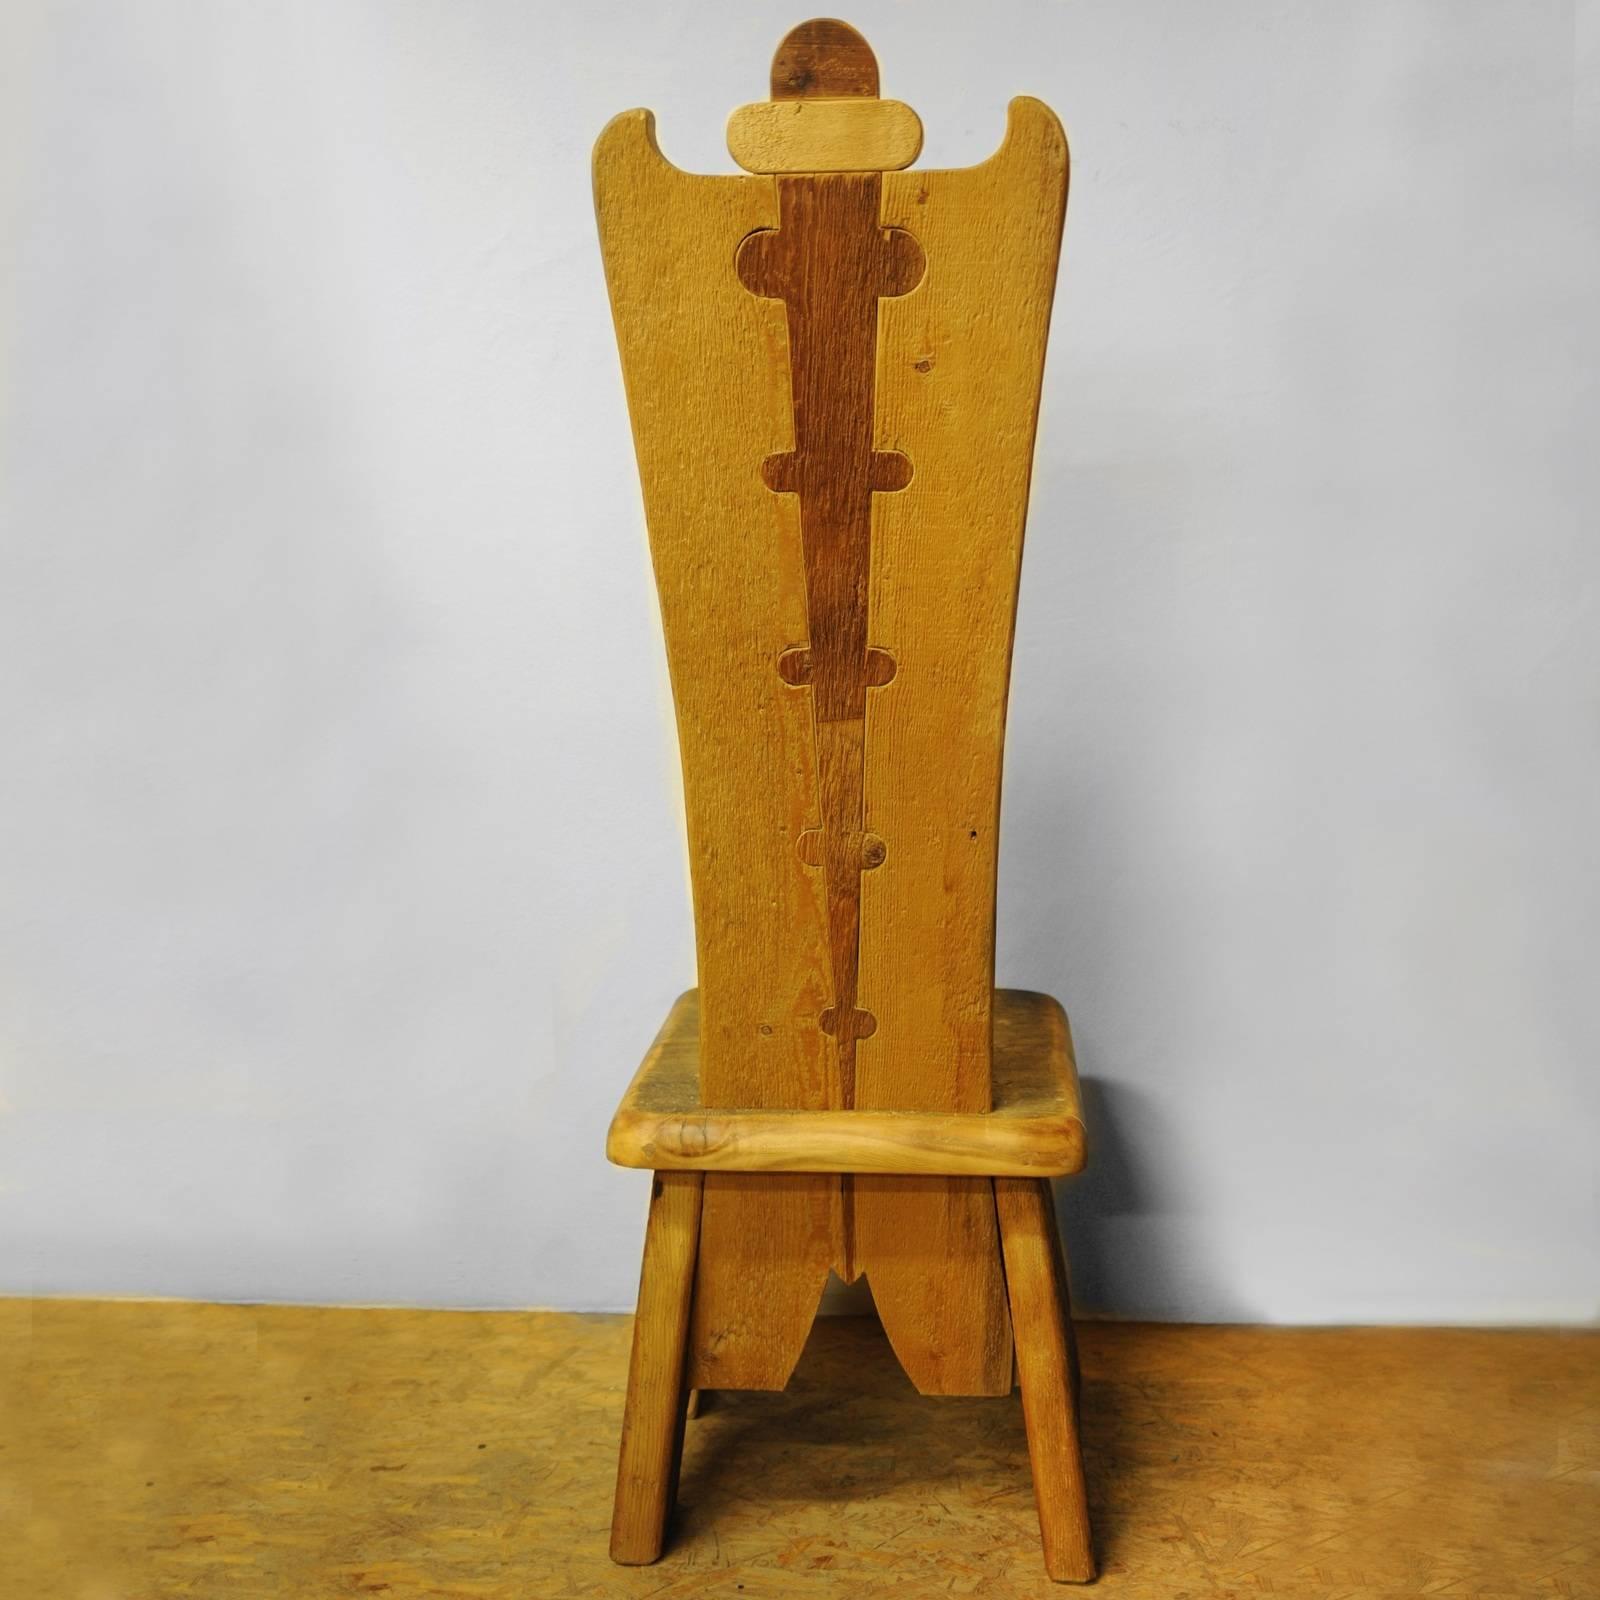 This stunning chair is part of the Throne collection, featuring 20 different designs, all inspired by the tall backrests of thrones. Crafted using reclaimed fir, Swiss pine, pine, and larch coming from the floors of 16th century houses, this chair